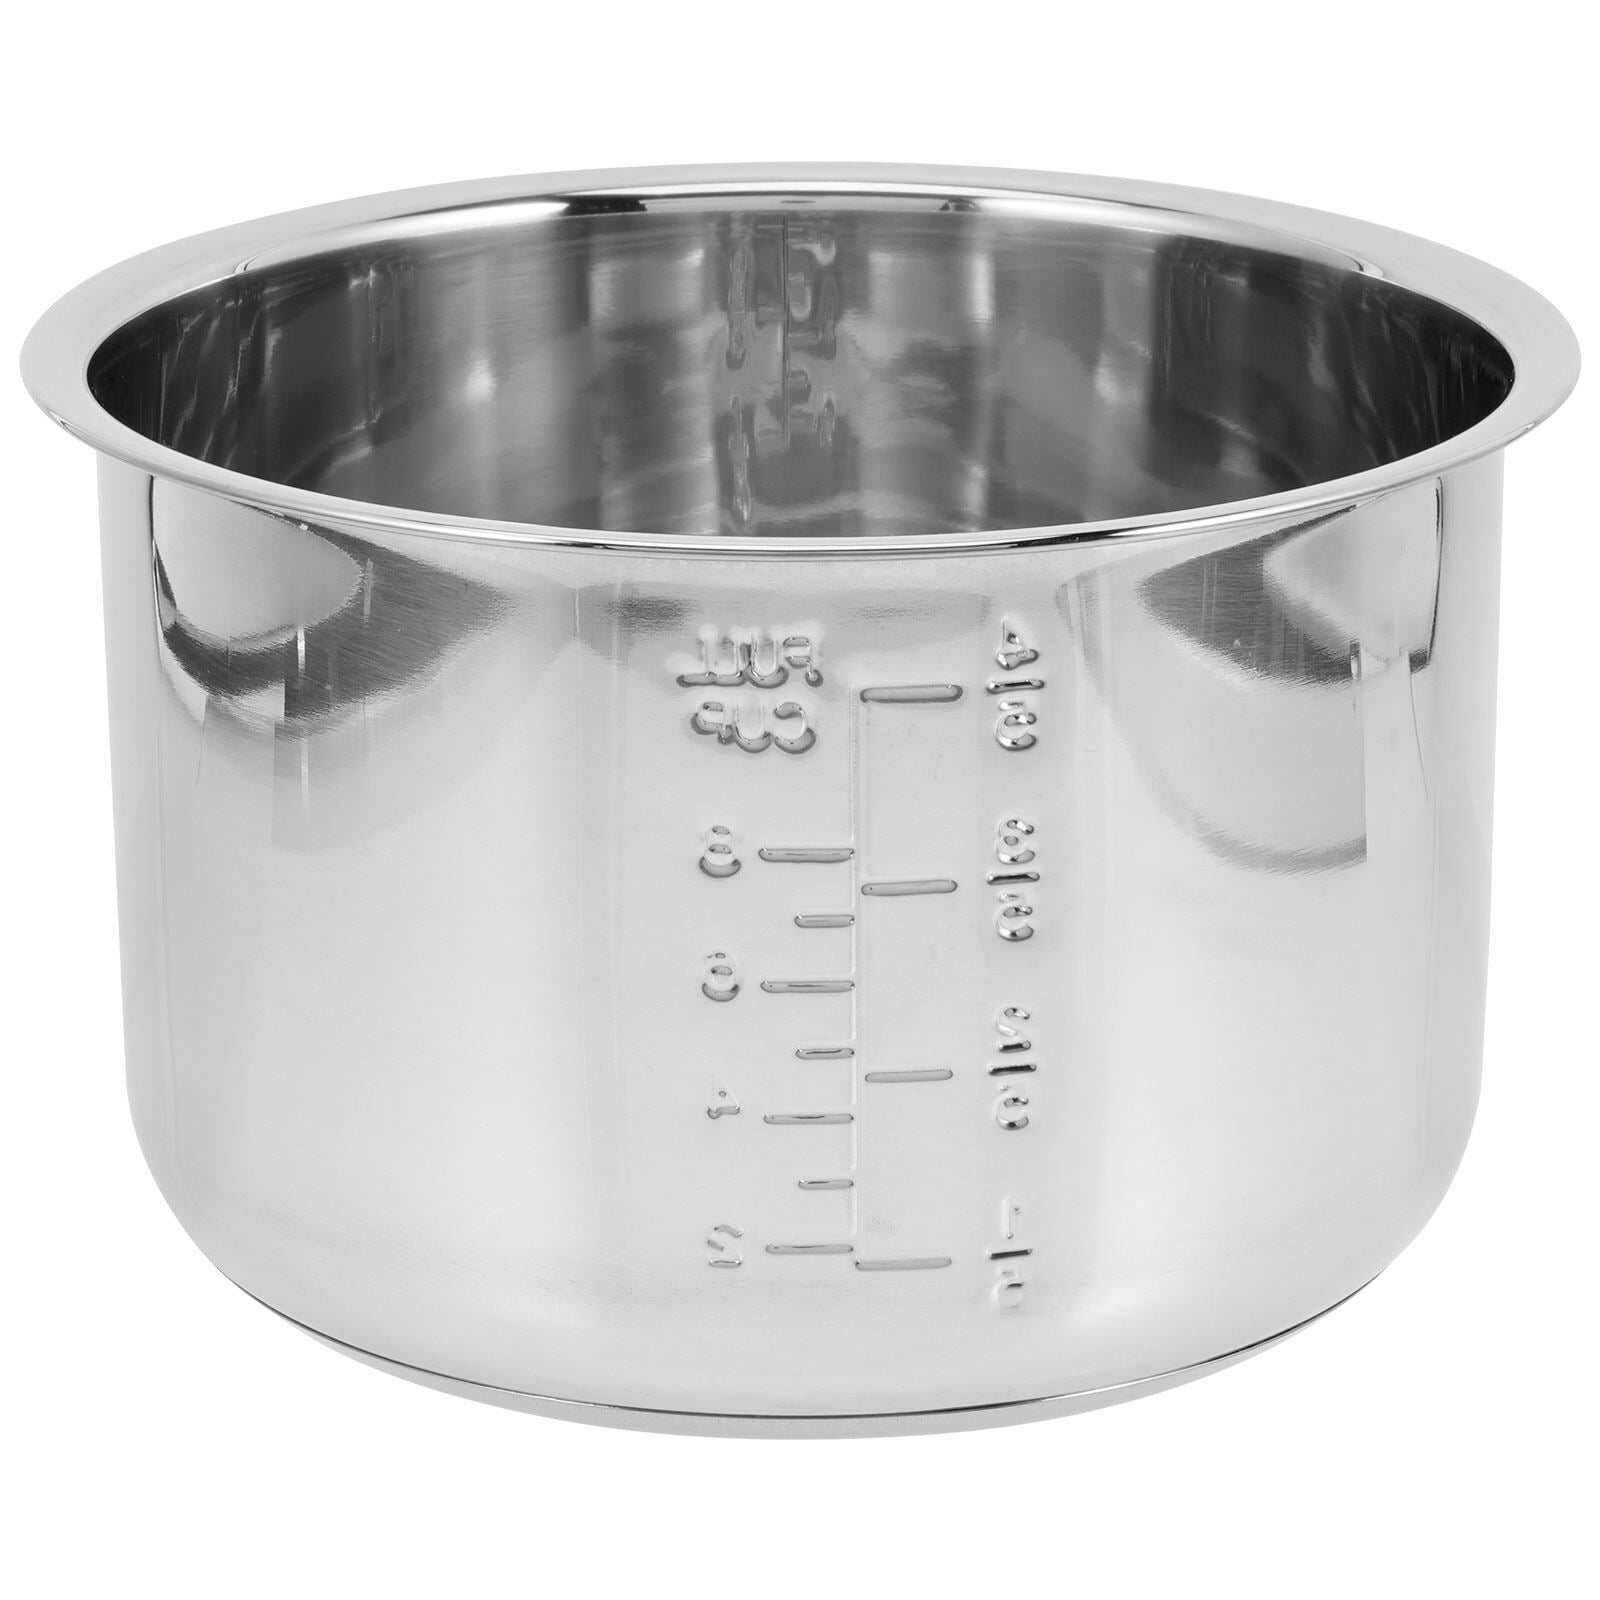 5L High Quality Pressure Cooker Inner Pot Rice Liner 304 Stainless